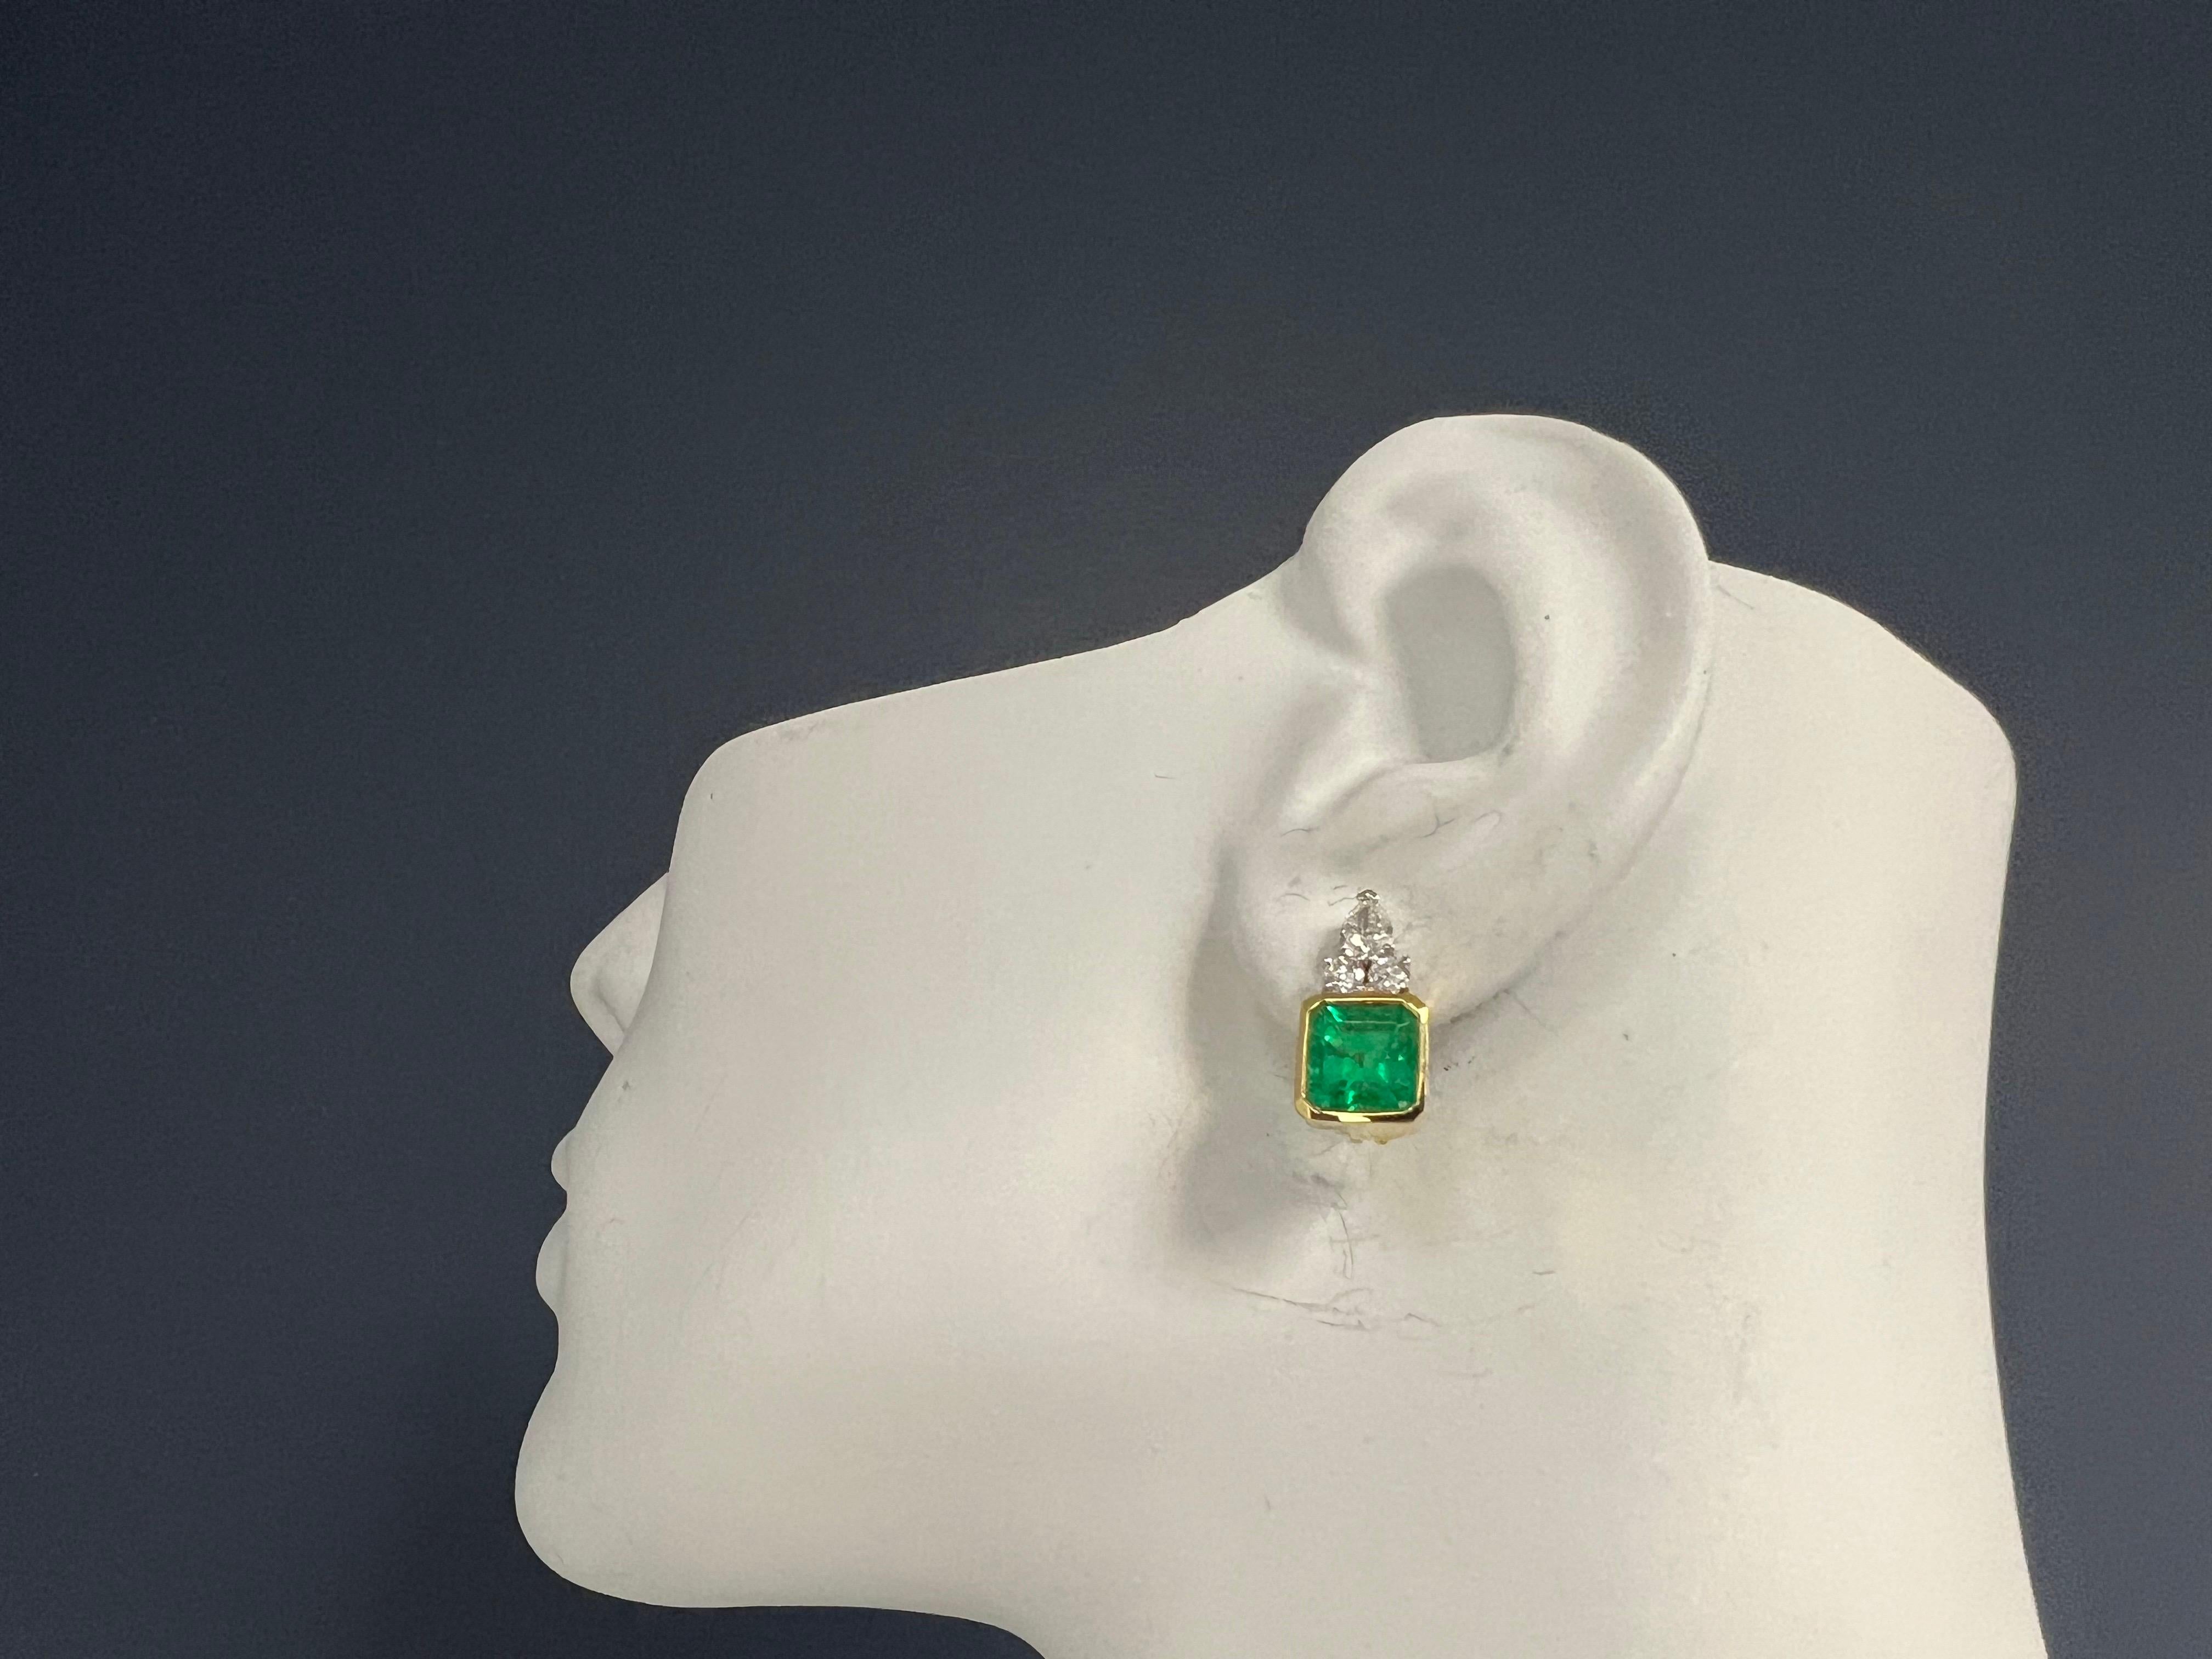 A magnificent pair of GIA certified Natural Green Colombian Emerald earrings, set in 18k yellow and white gold. 

The emeralds are bezel set and weigh approximately 4.75 carats. One is approximately 2.25 carats (7.75x7.7x5.67mm) and the other